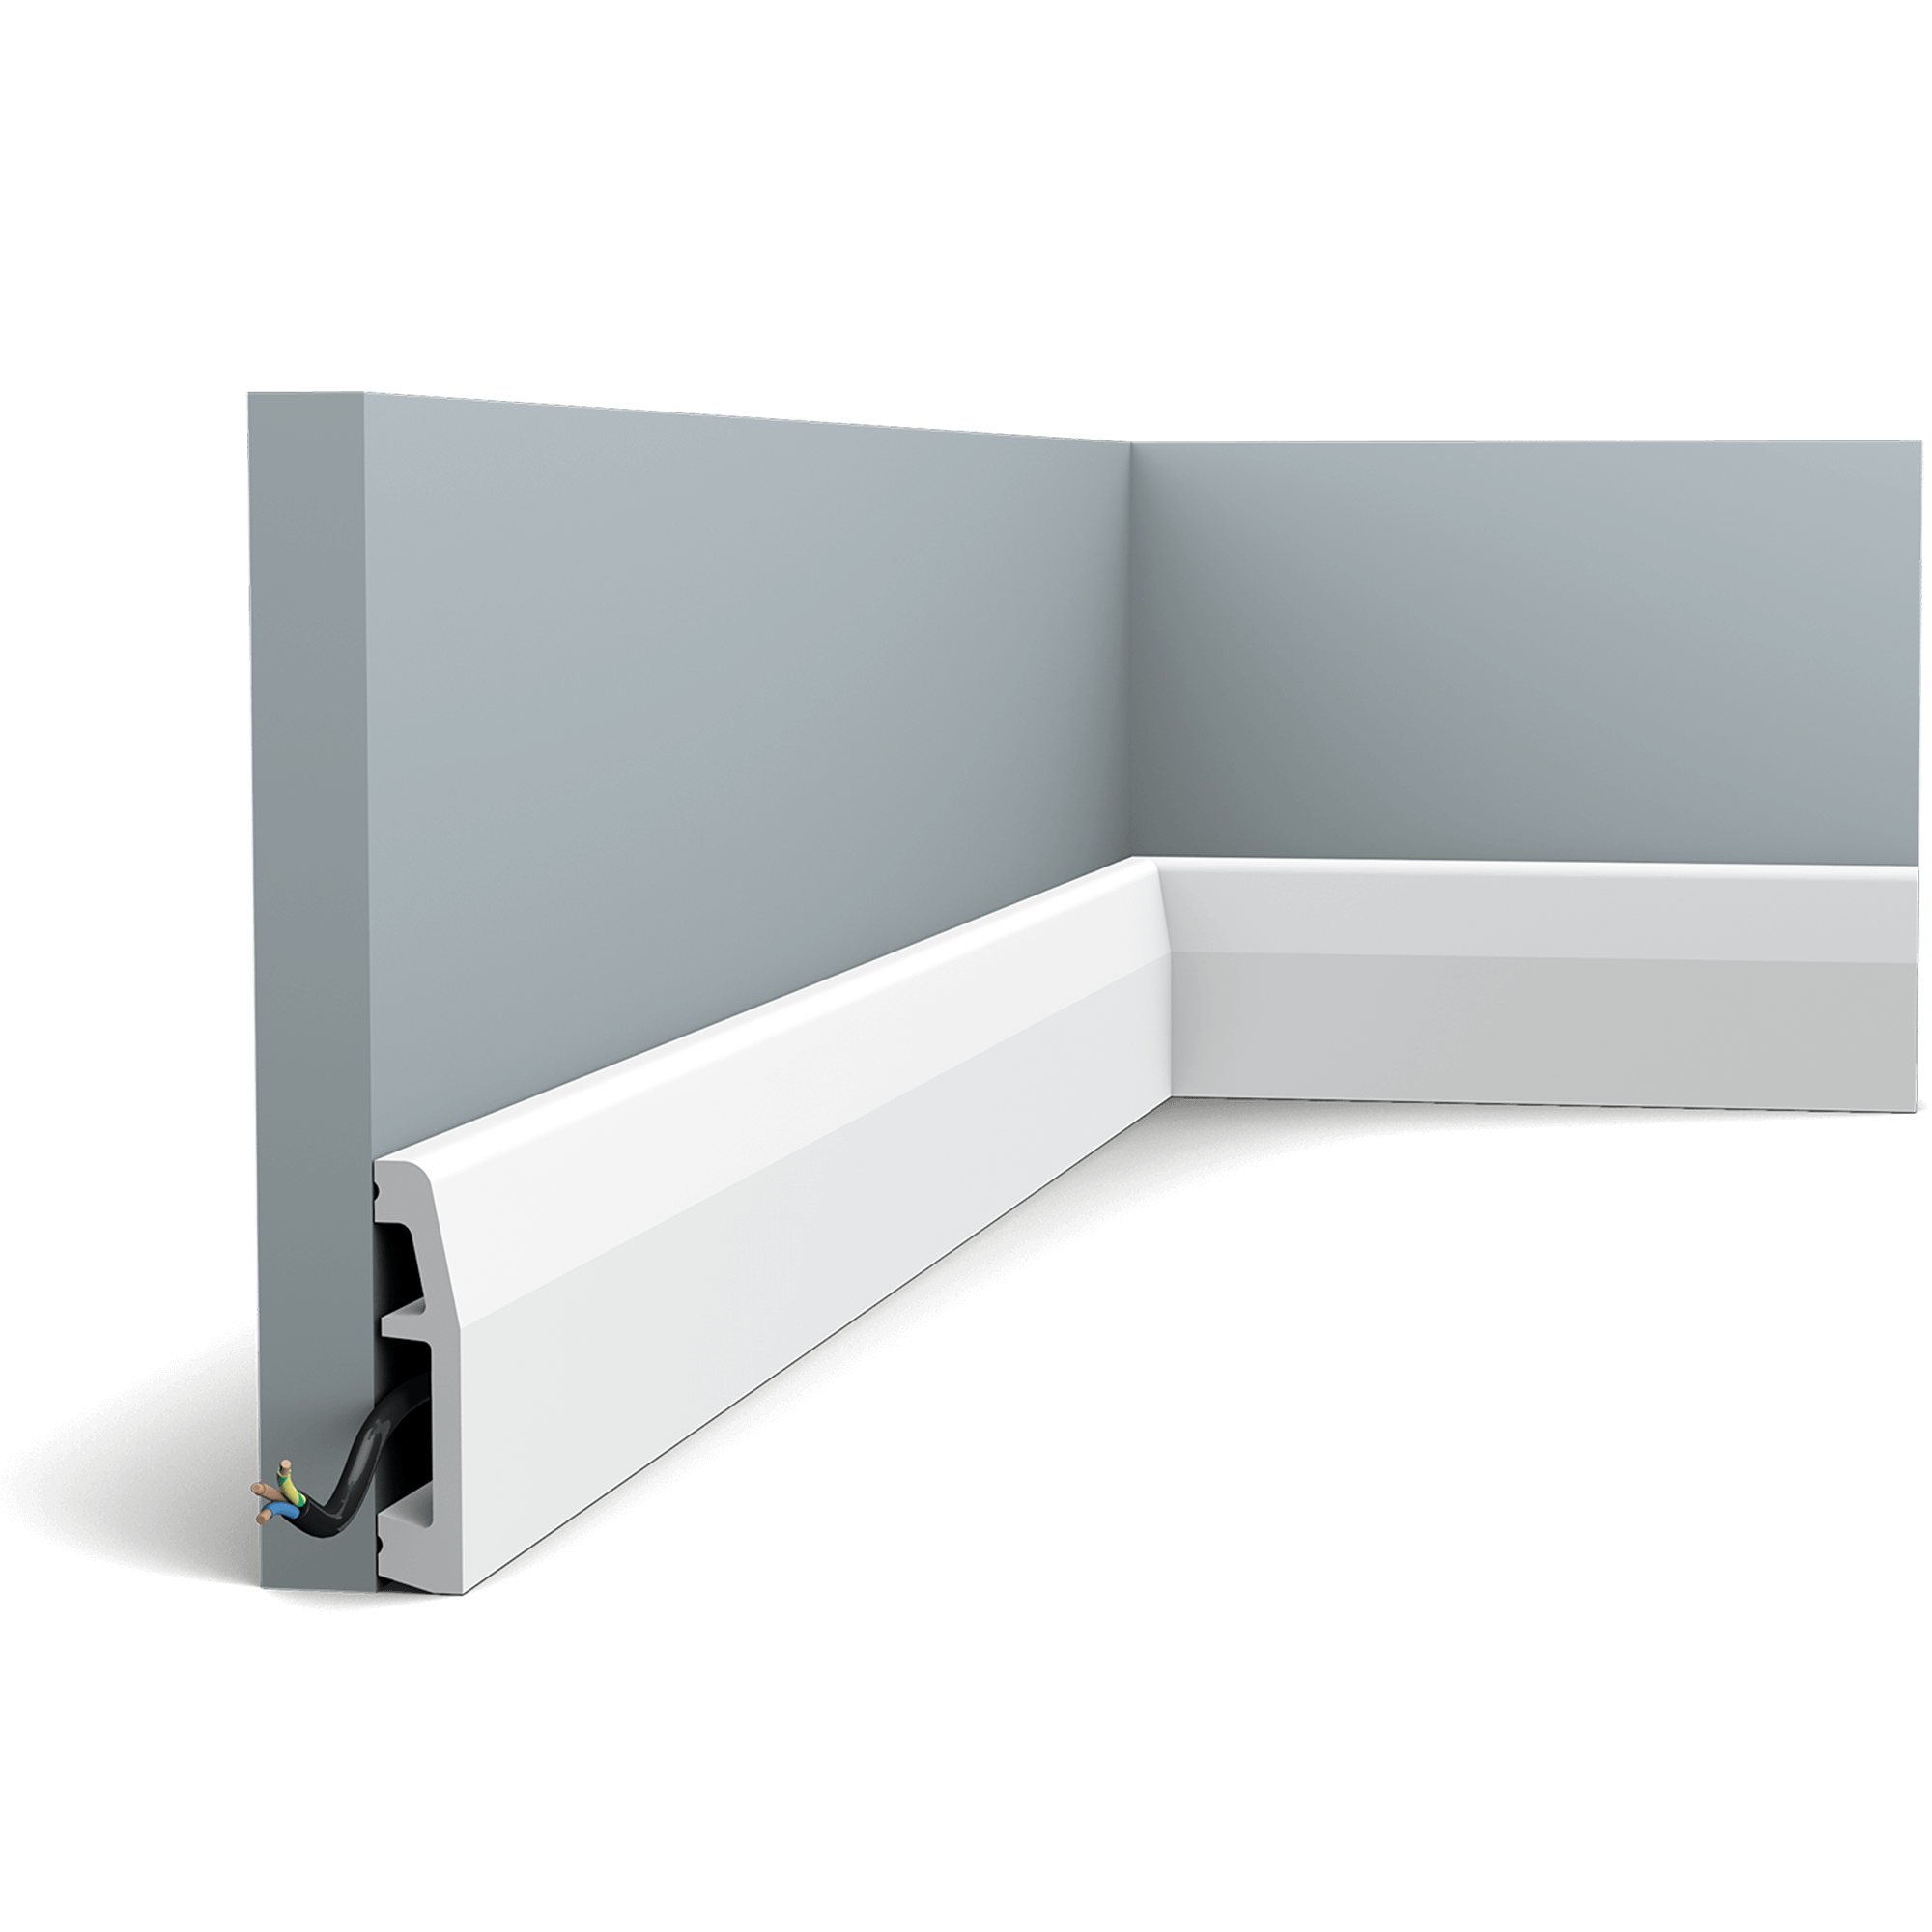 This minimalist skirting board with a slight angle provides a perfect finish for both modern and classic homes.